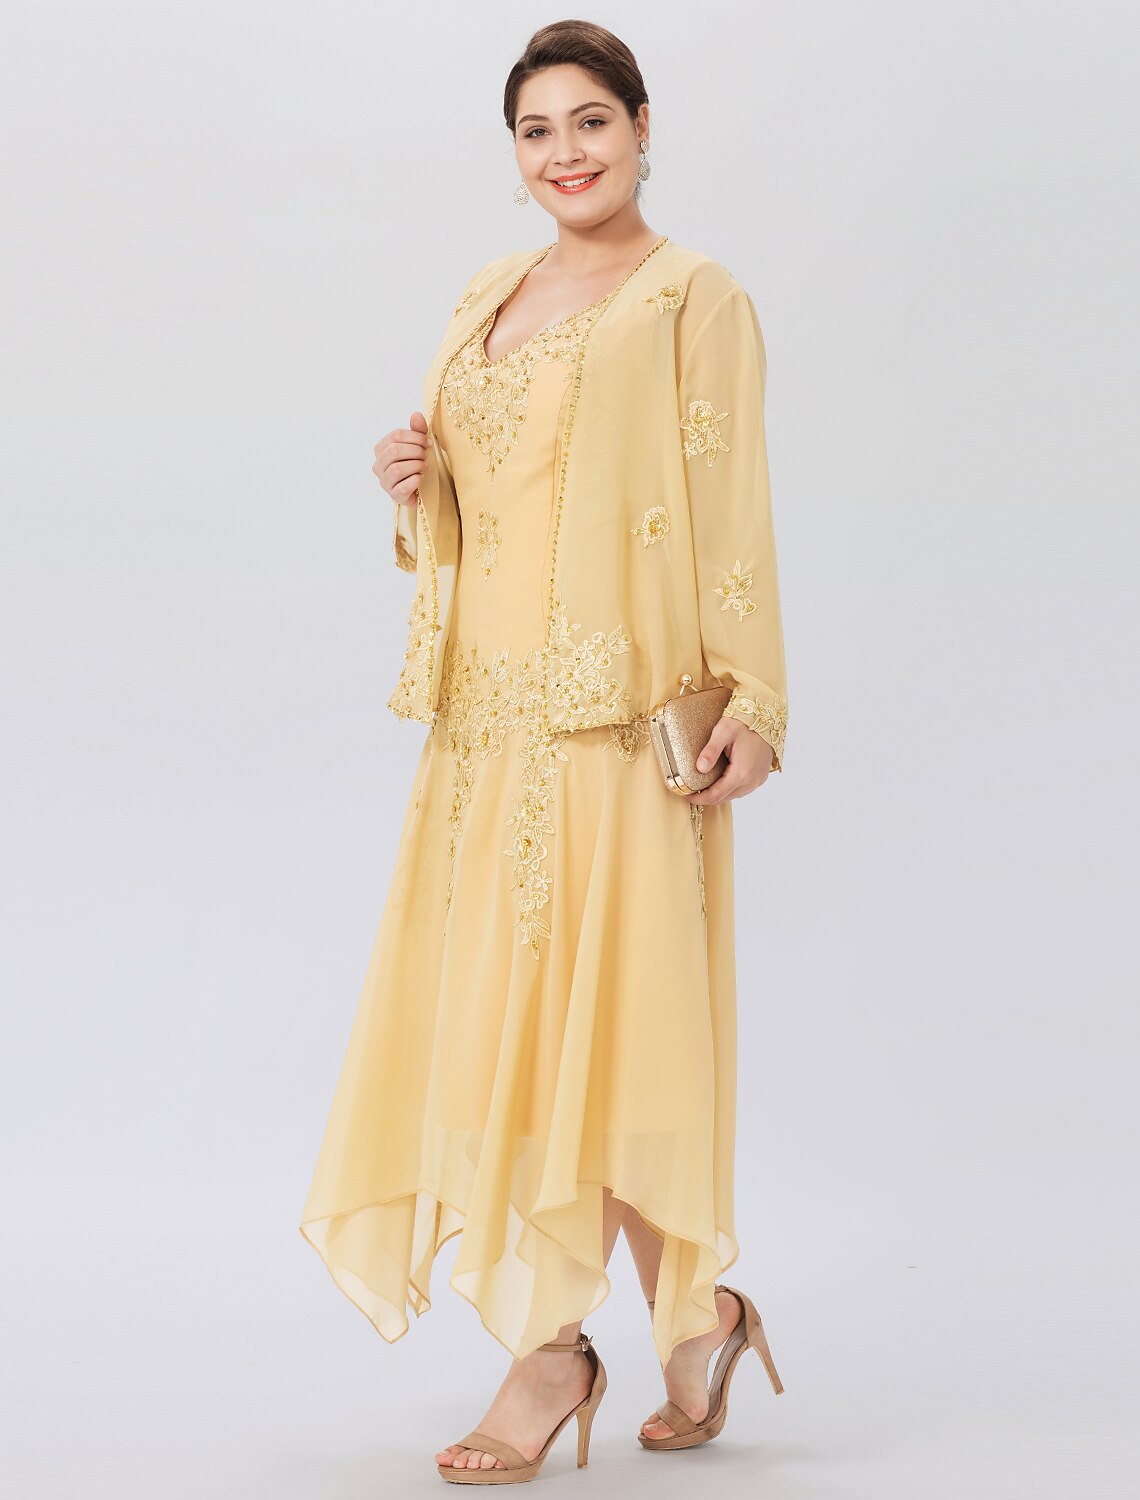 A-Line Mother of the Bride Dress Formal Plus Size Elegant High Low V Neck Asymmetrical Chiffon Beaded Lace Long Sleeve Wrap Included with Beading Appliques